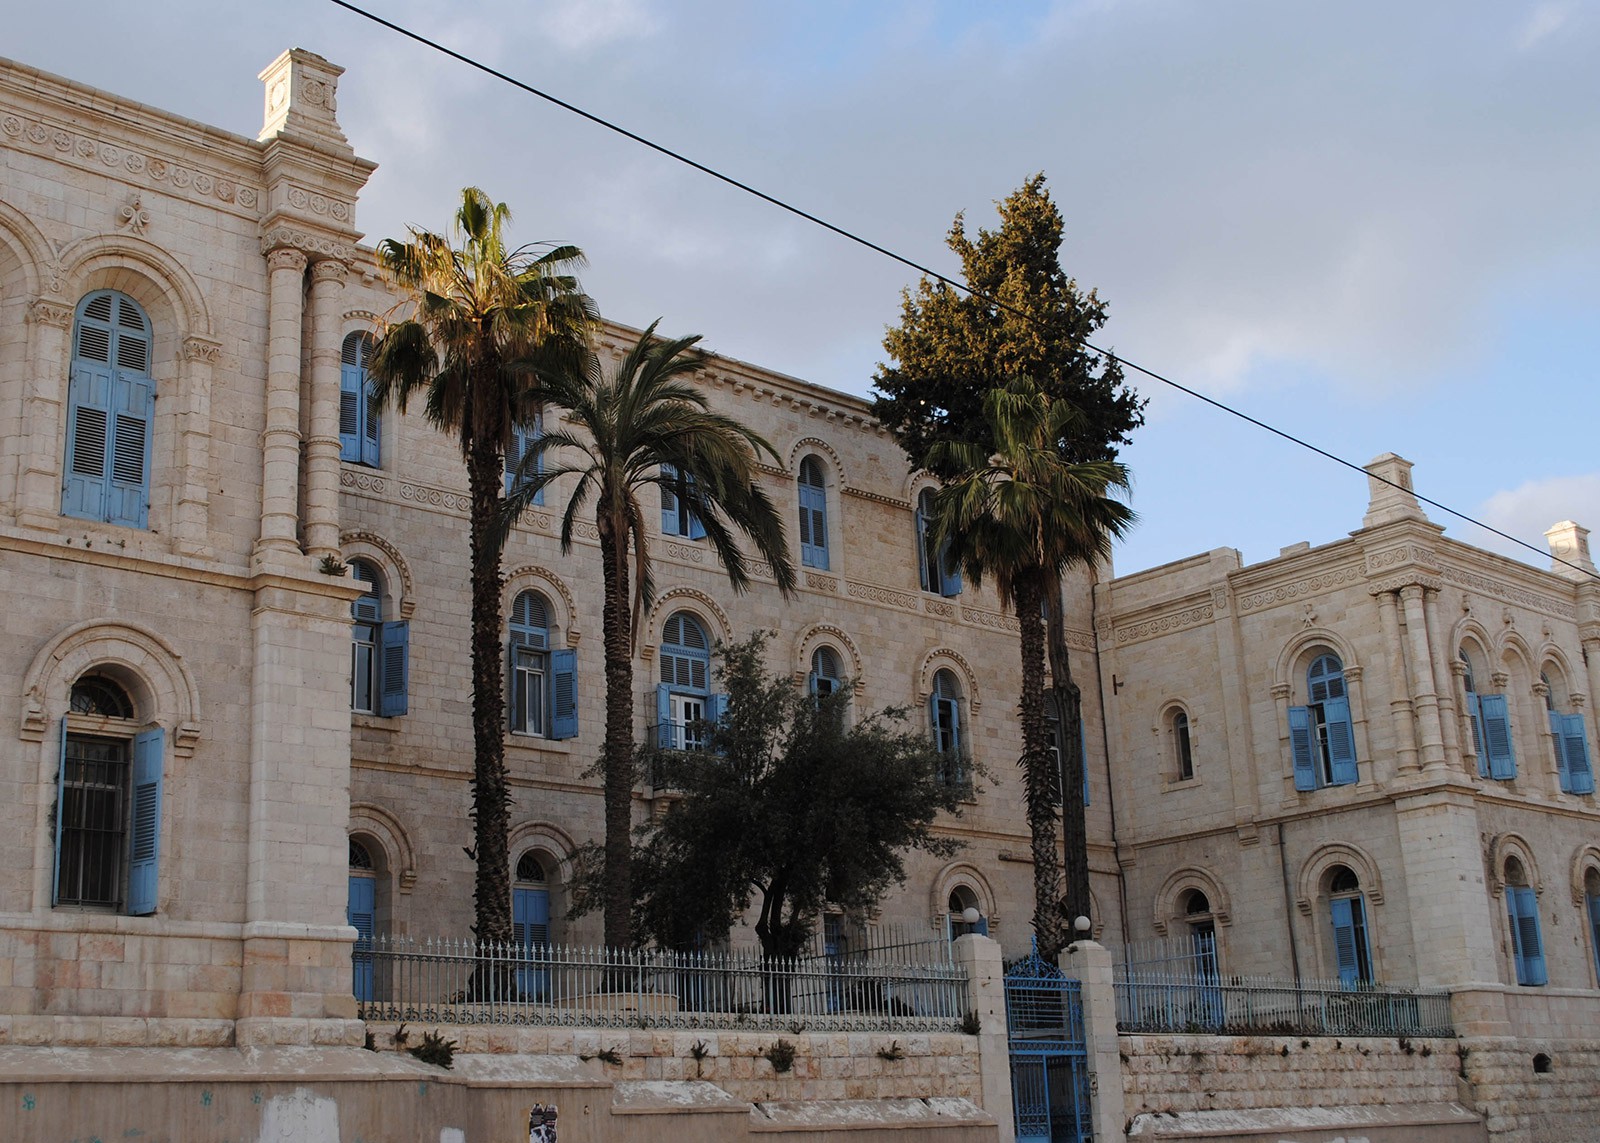 Today’s “Saint Louis Hospital” in Jerusalem is the successor institution to the “St. Ludwig” hospital which Arnold co-founded in October 1851 for patients of all religions and nationalities.  CC BY 2.0 / Photo: Paulina Zet, Vered Hasharon